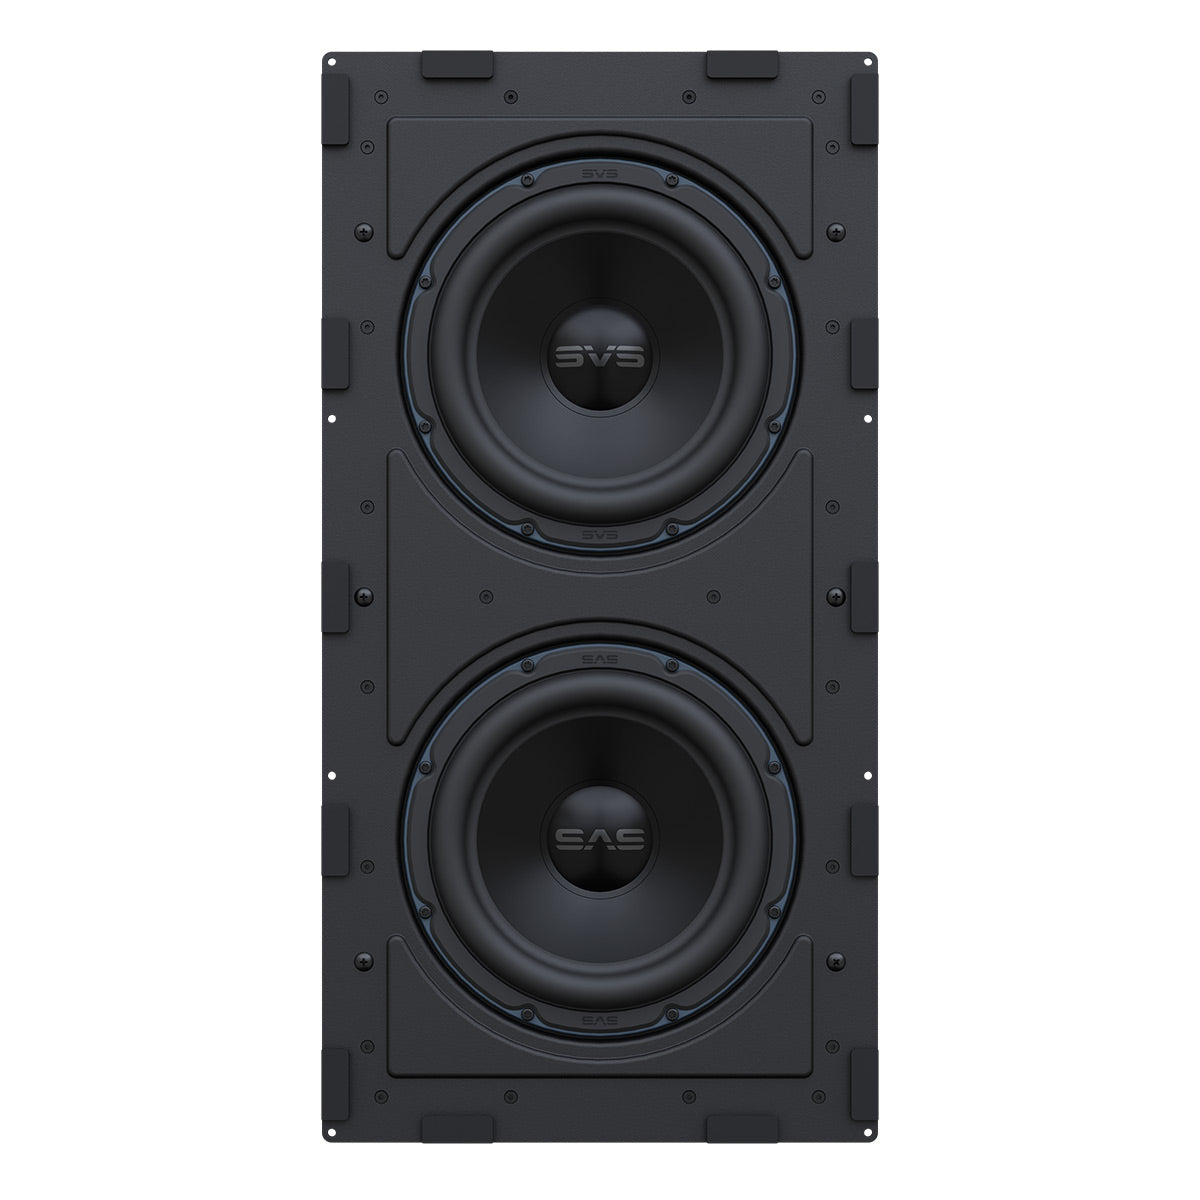 SVS 3000 In-Wall Dual Sealed Subwoofer System with Sledge STA-800D2C Amplifier